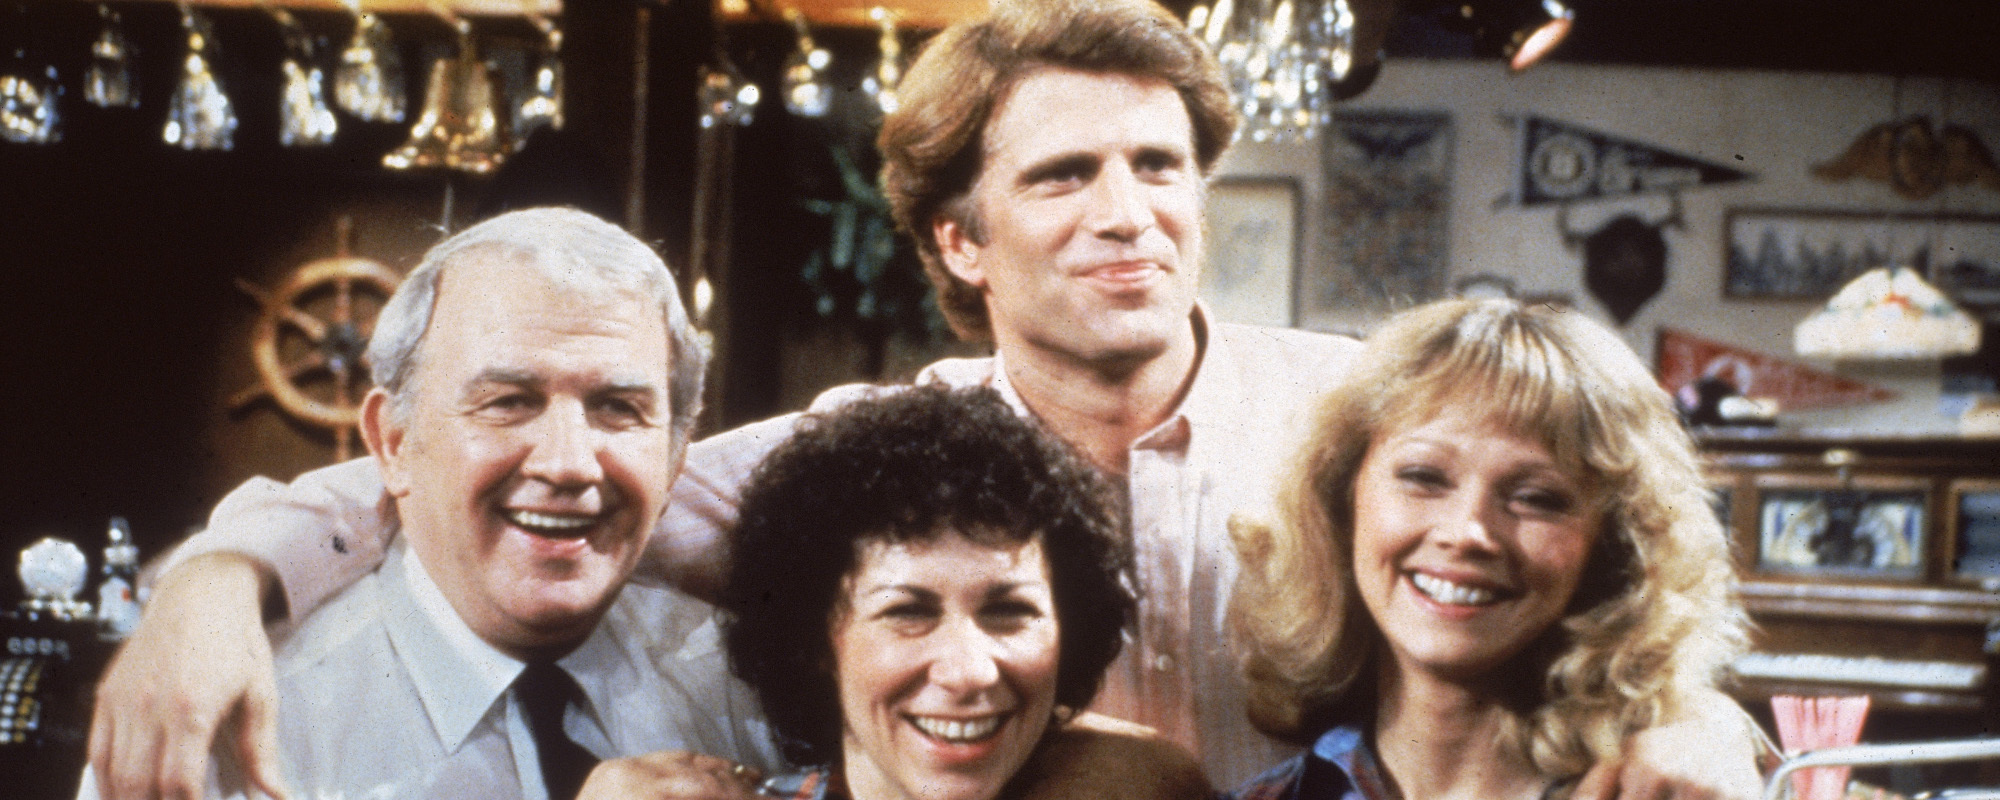 The Meaning Behind the ‘Cheers’ Theme Song ‘Where Everybody Knows Your Name’